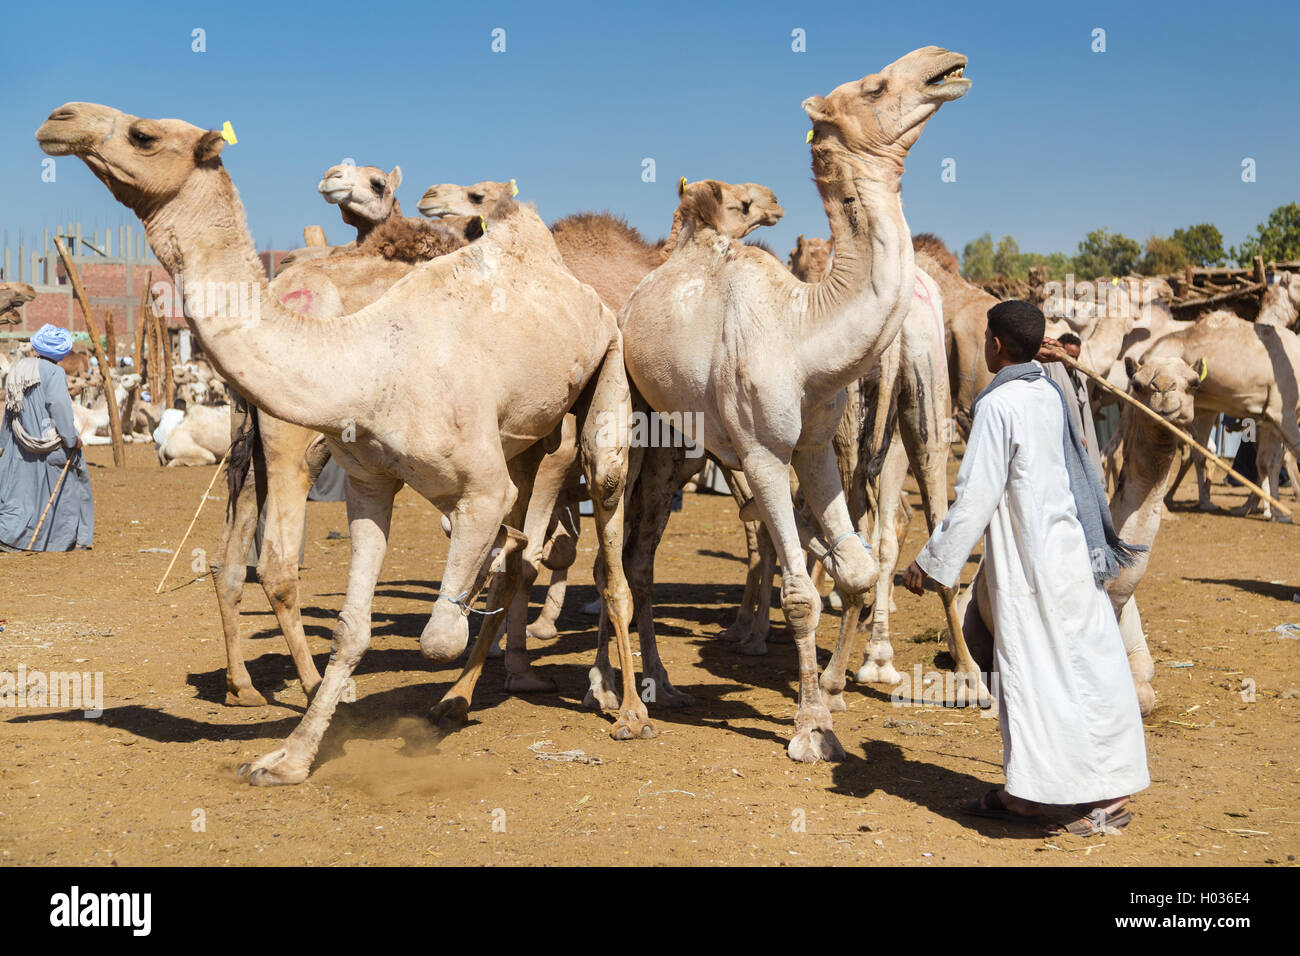 DARAW, EGYPT - FEBRUARY 6, 2016: Local young camel salesmen on Camel market using stick to control them. Stock Photo